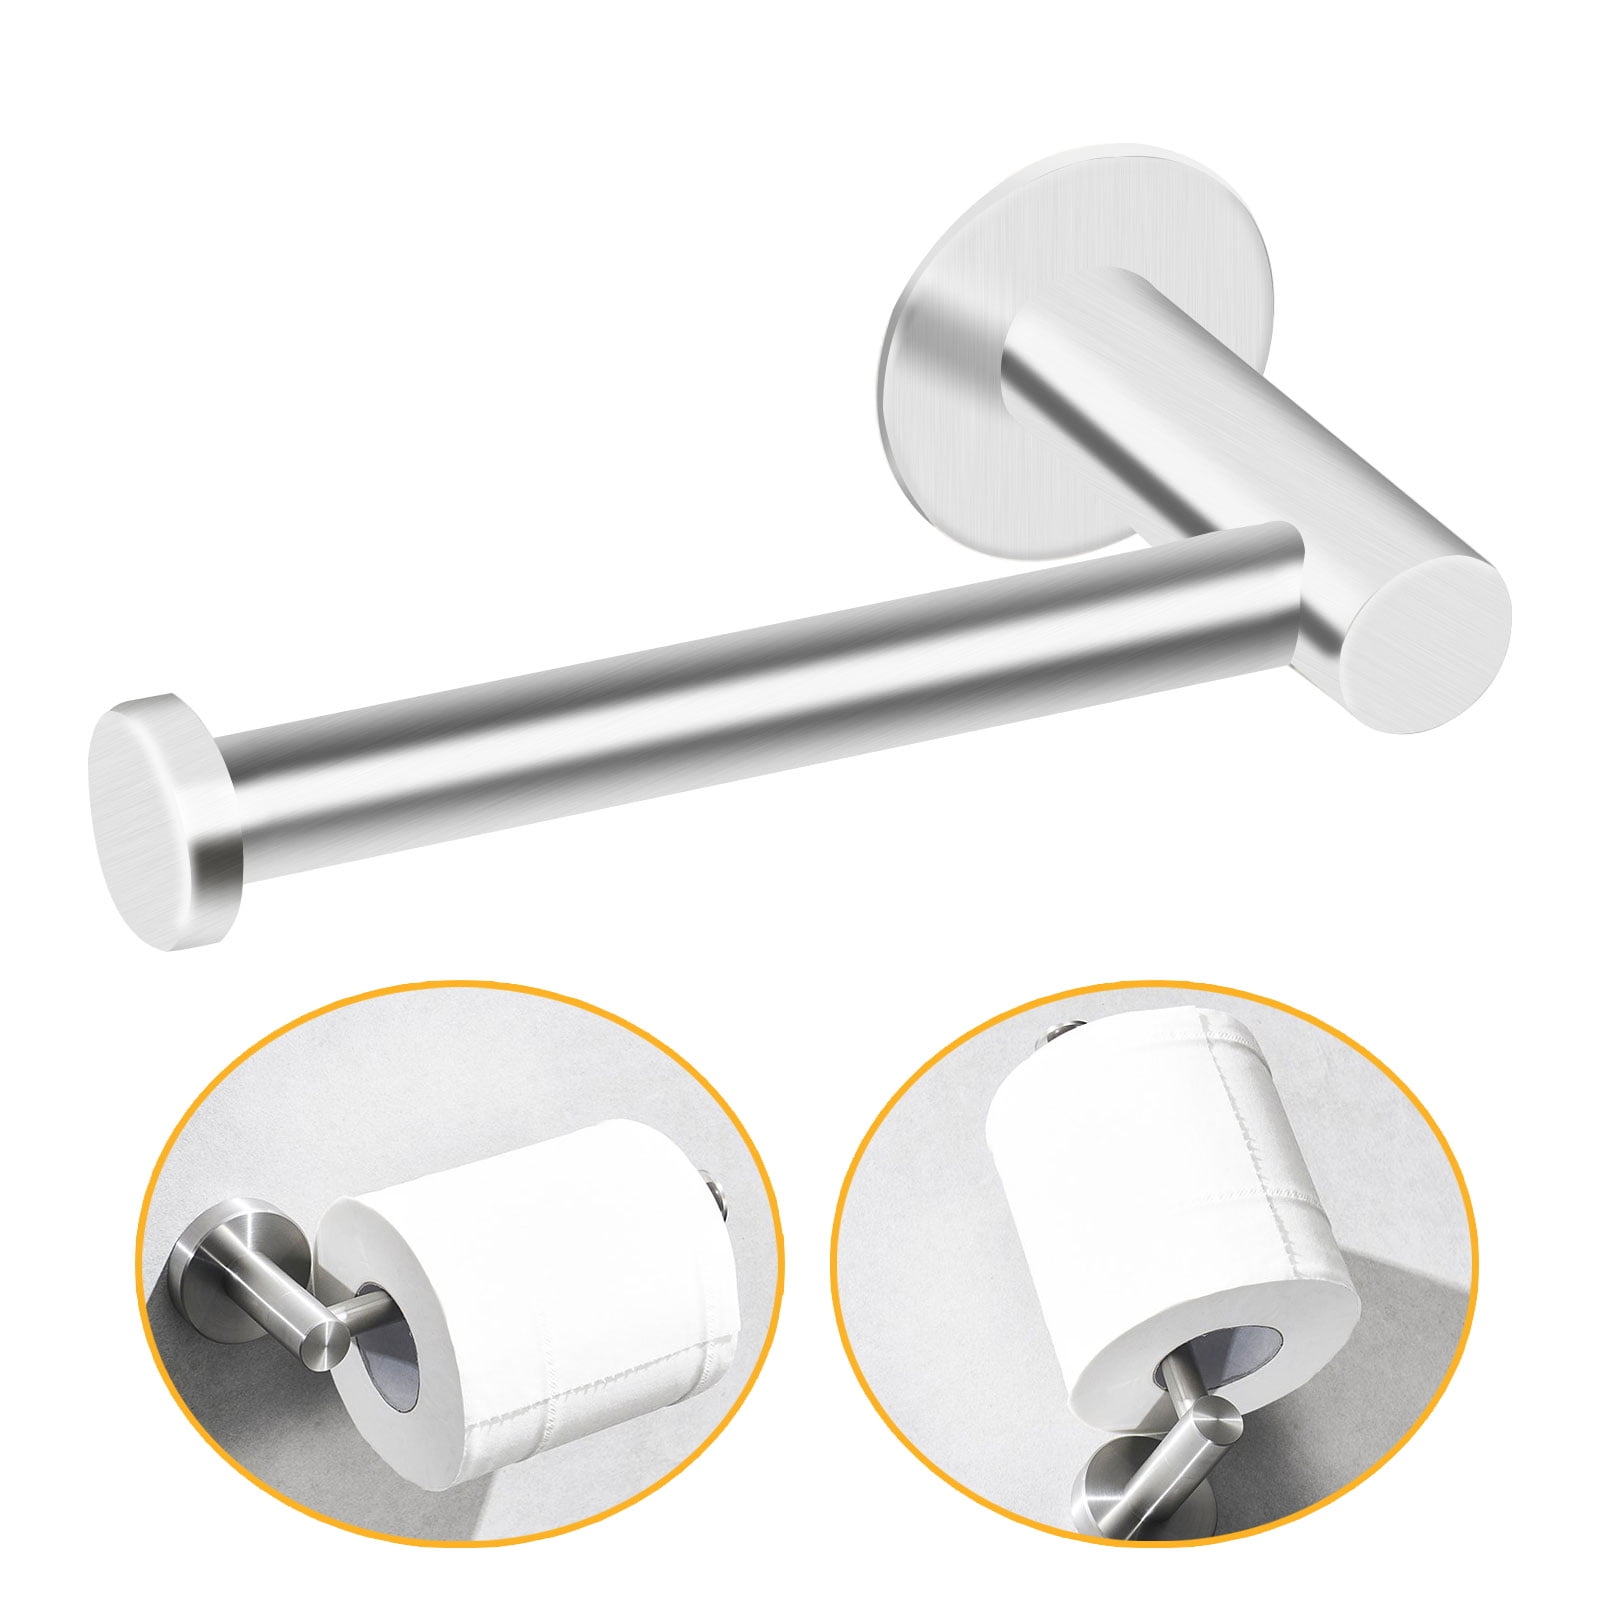 TocTen Toilet Paper Holder-Bathroom Tissue Holder Fit Big Roll Paper,  Toilet Paper Roll Holder Wall Mounted Made of Thicken 304 Stainless Steel